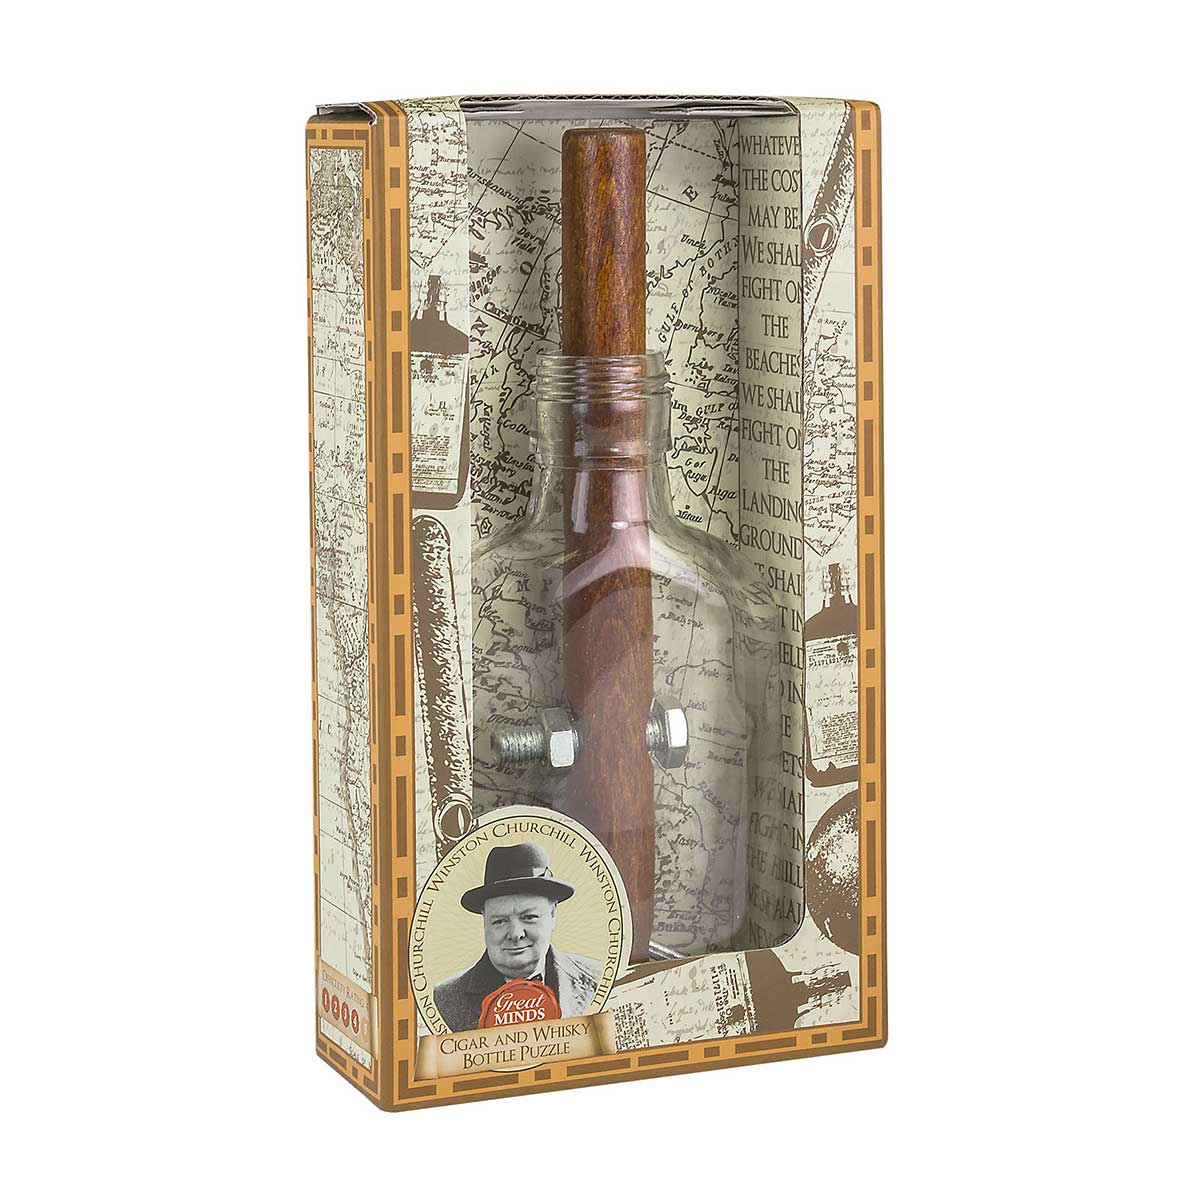 Professor Puzzle GREAT MINDS CHURCHILLS CIGAR and WHISKEY BOTTLE PUZZLE 